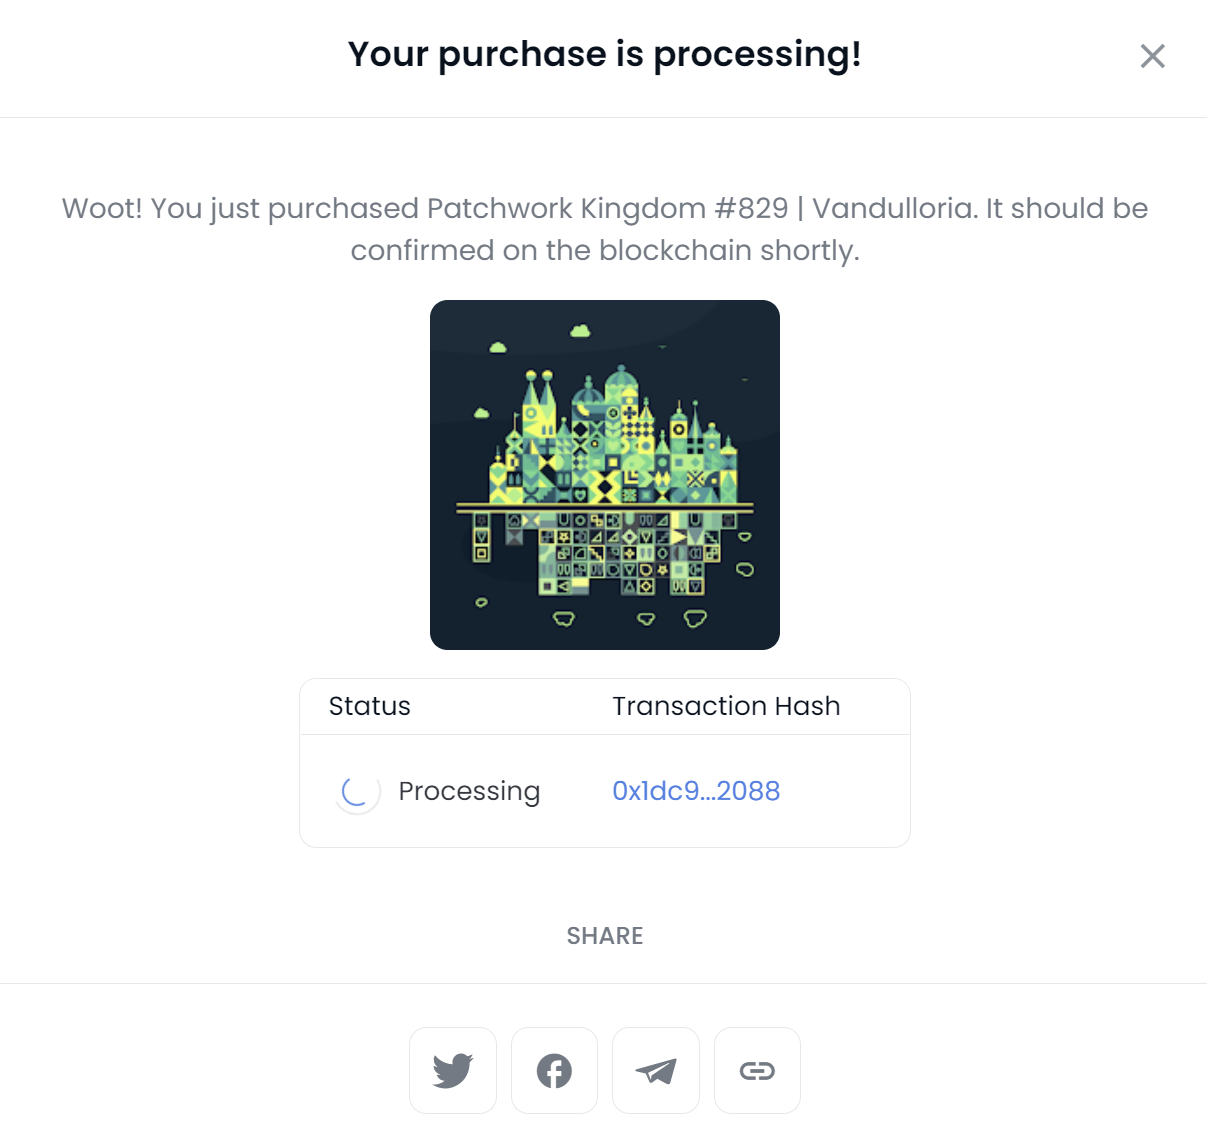 Sample Buy Now transaction processing screen from OpenSea.io 